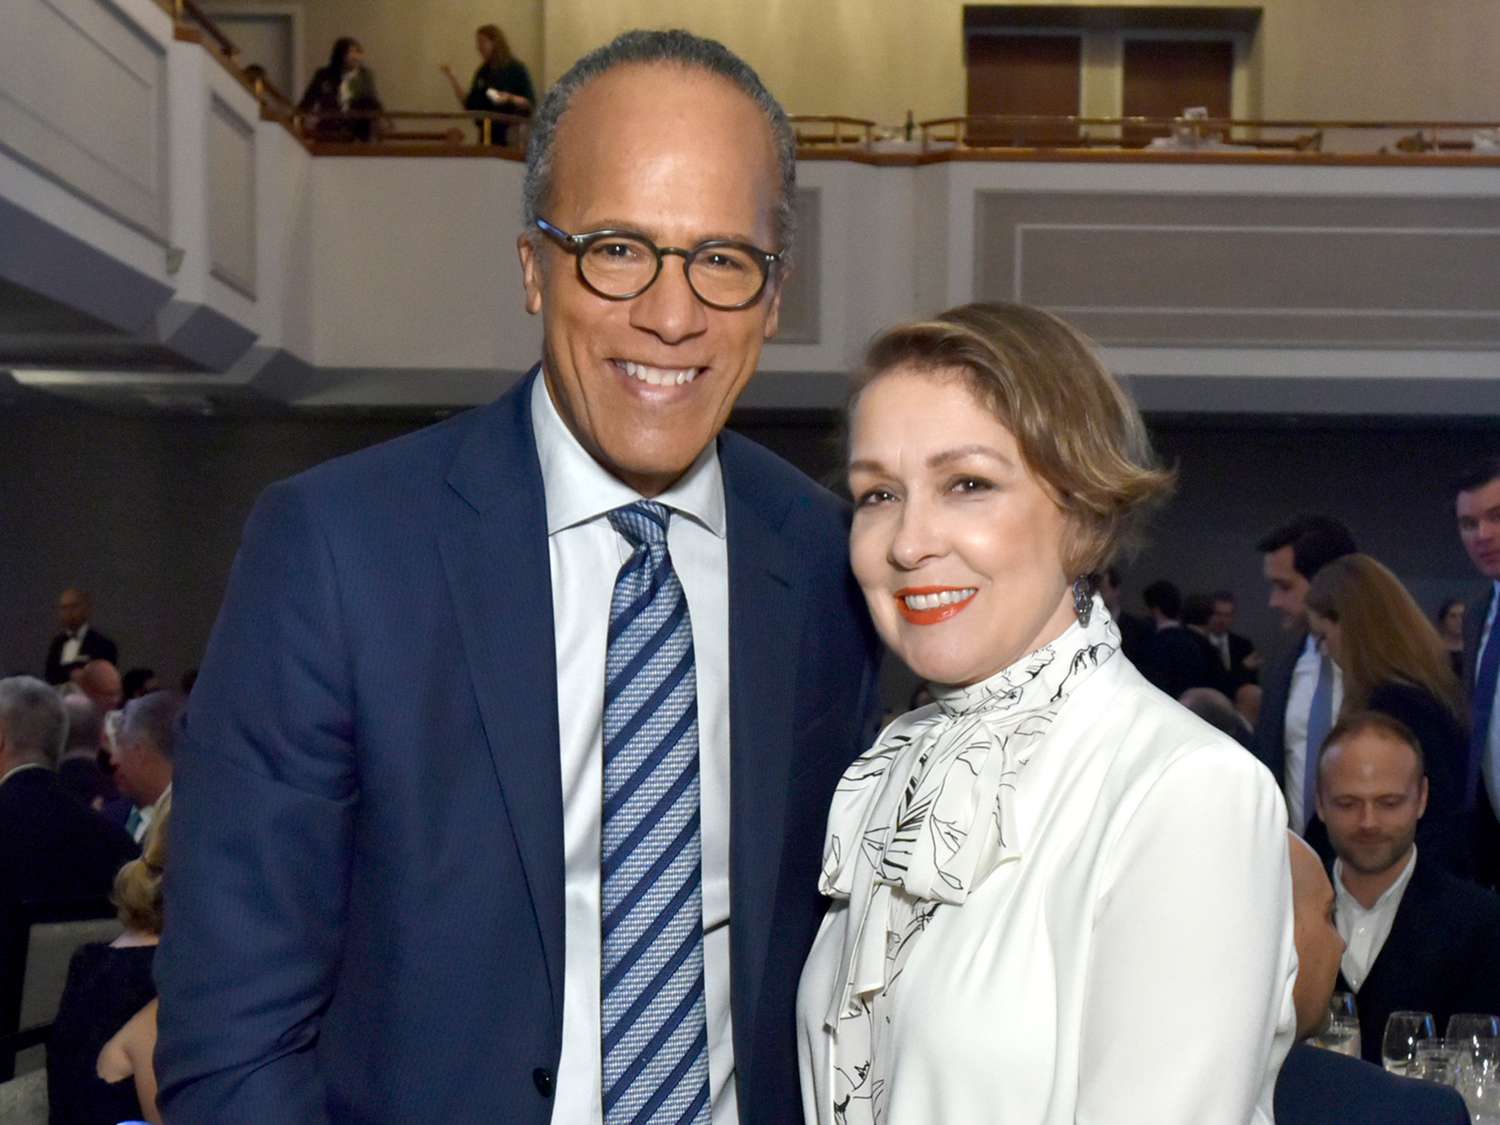 Who Is Lester Holt's Wife? All About Carol Hagen